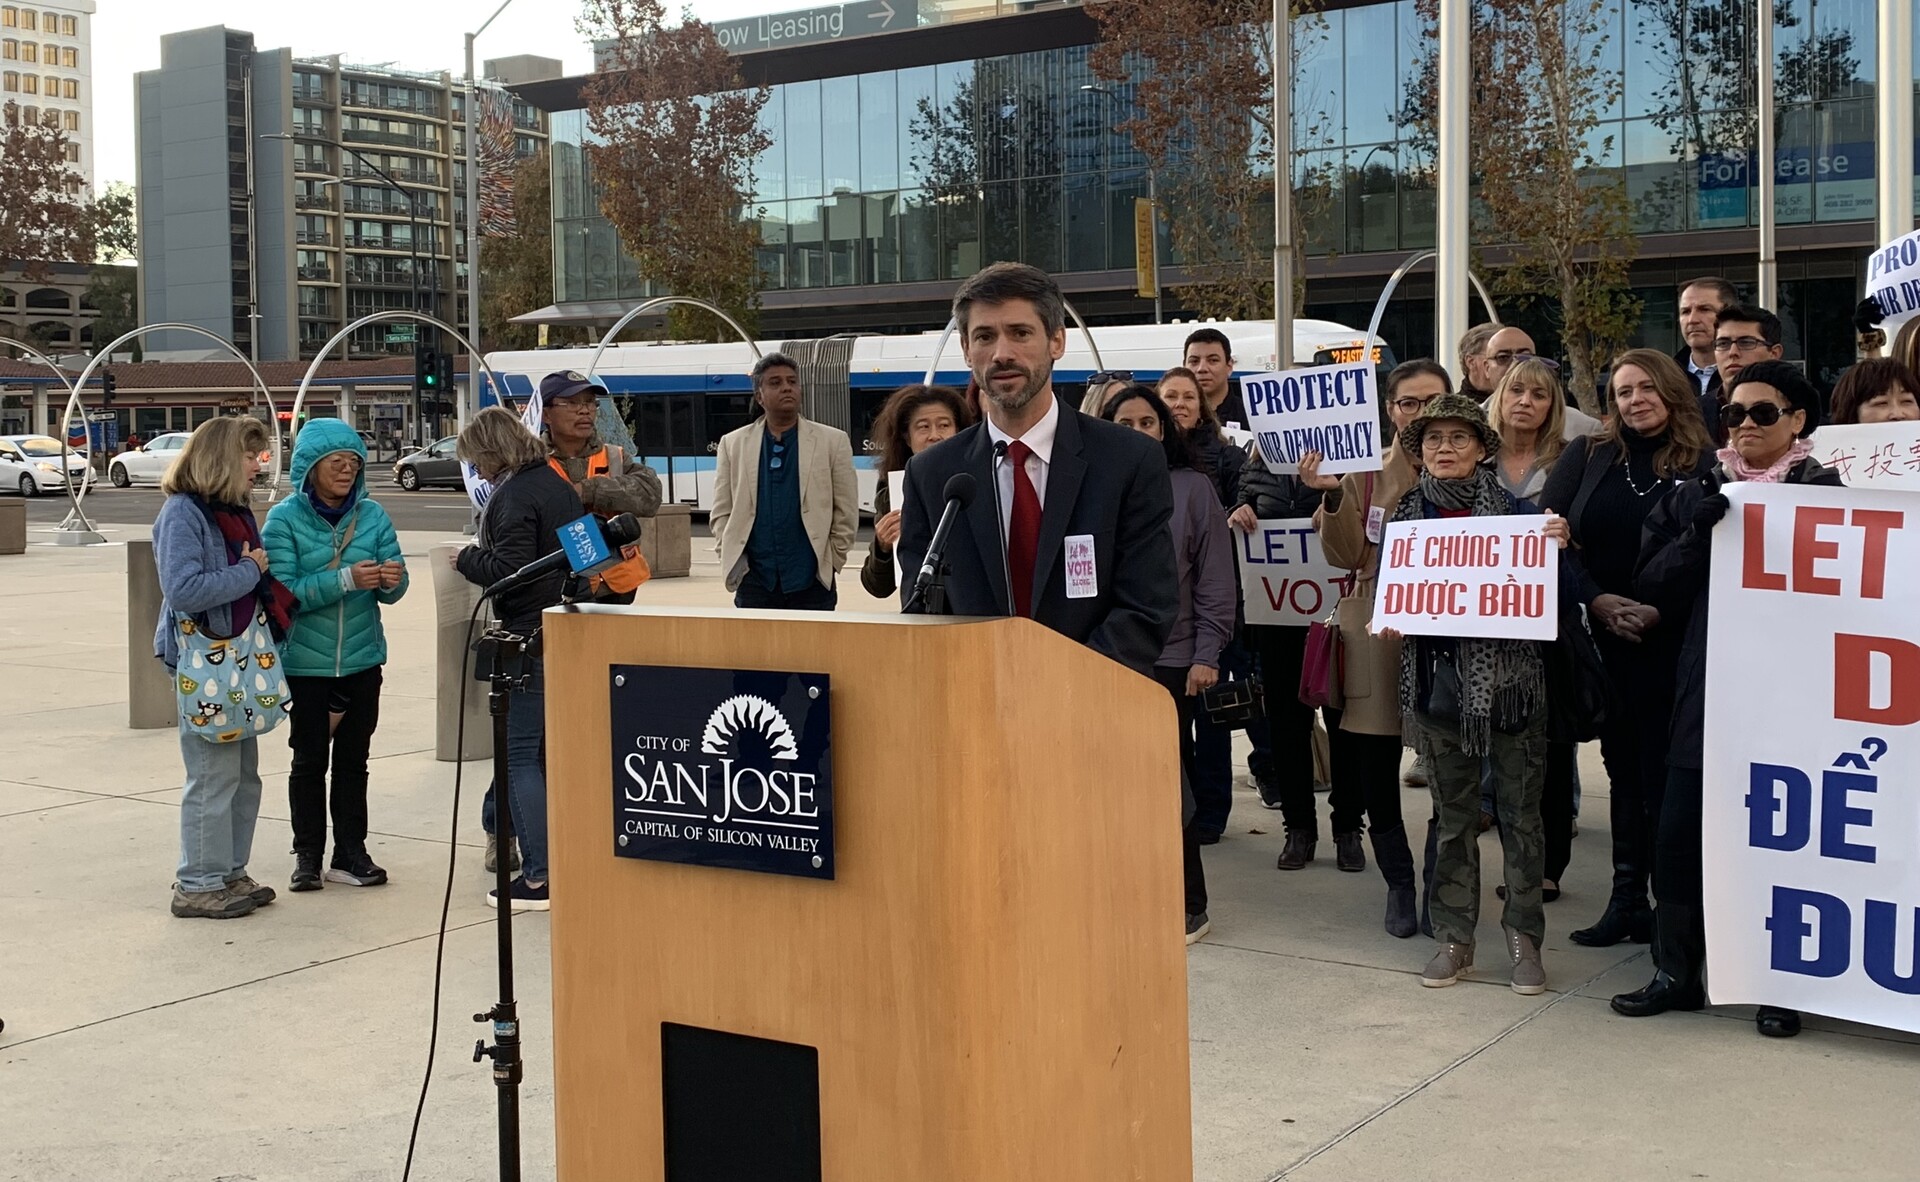 A man with a beard wearing a suit and tie stands behind a podium labeled, "San José Capital of Silicon Valley." He is surrounded by people holding various signs. Some read, "Protect our Democracy."